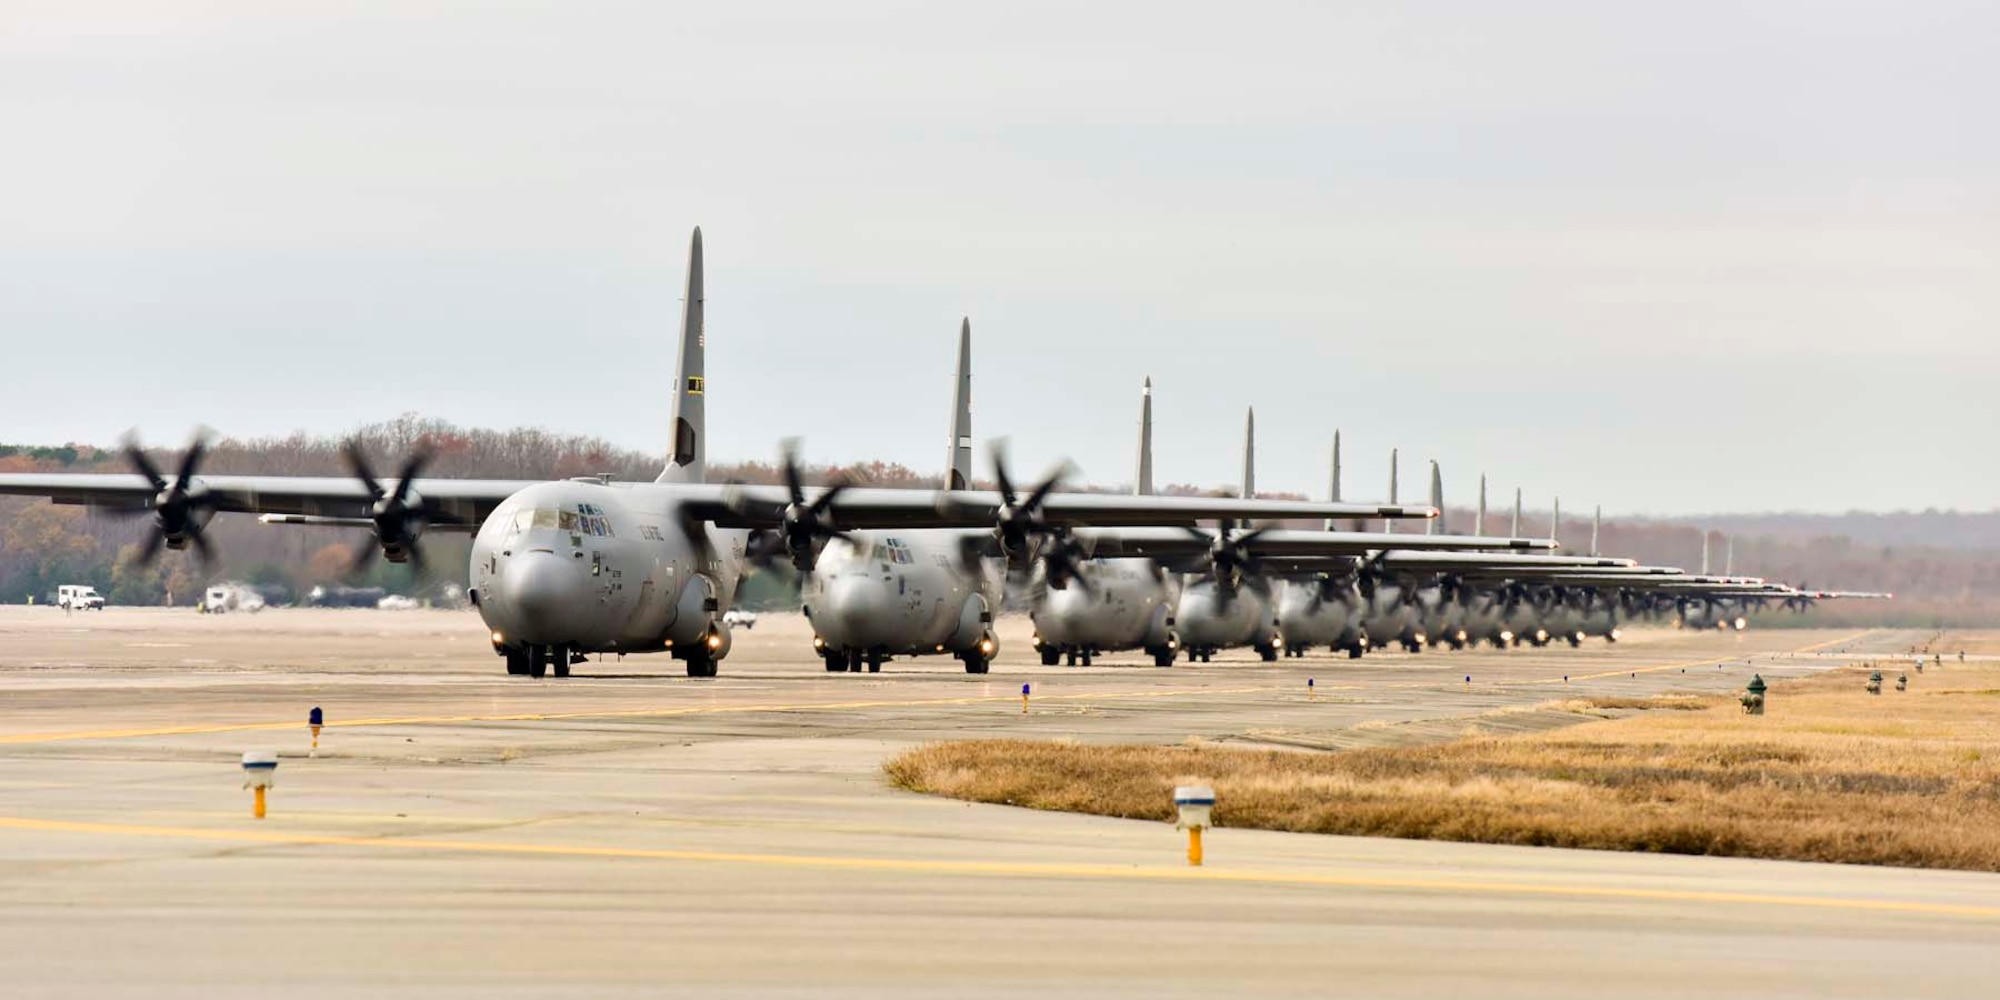 Fourteen C-130J aircraft perform an elephant walk towards the runway for takeoff during Operation Tenacious Turtle on Nov. 21, 2017, at Little Rock Air Force Base, Ark.